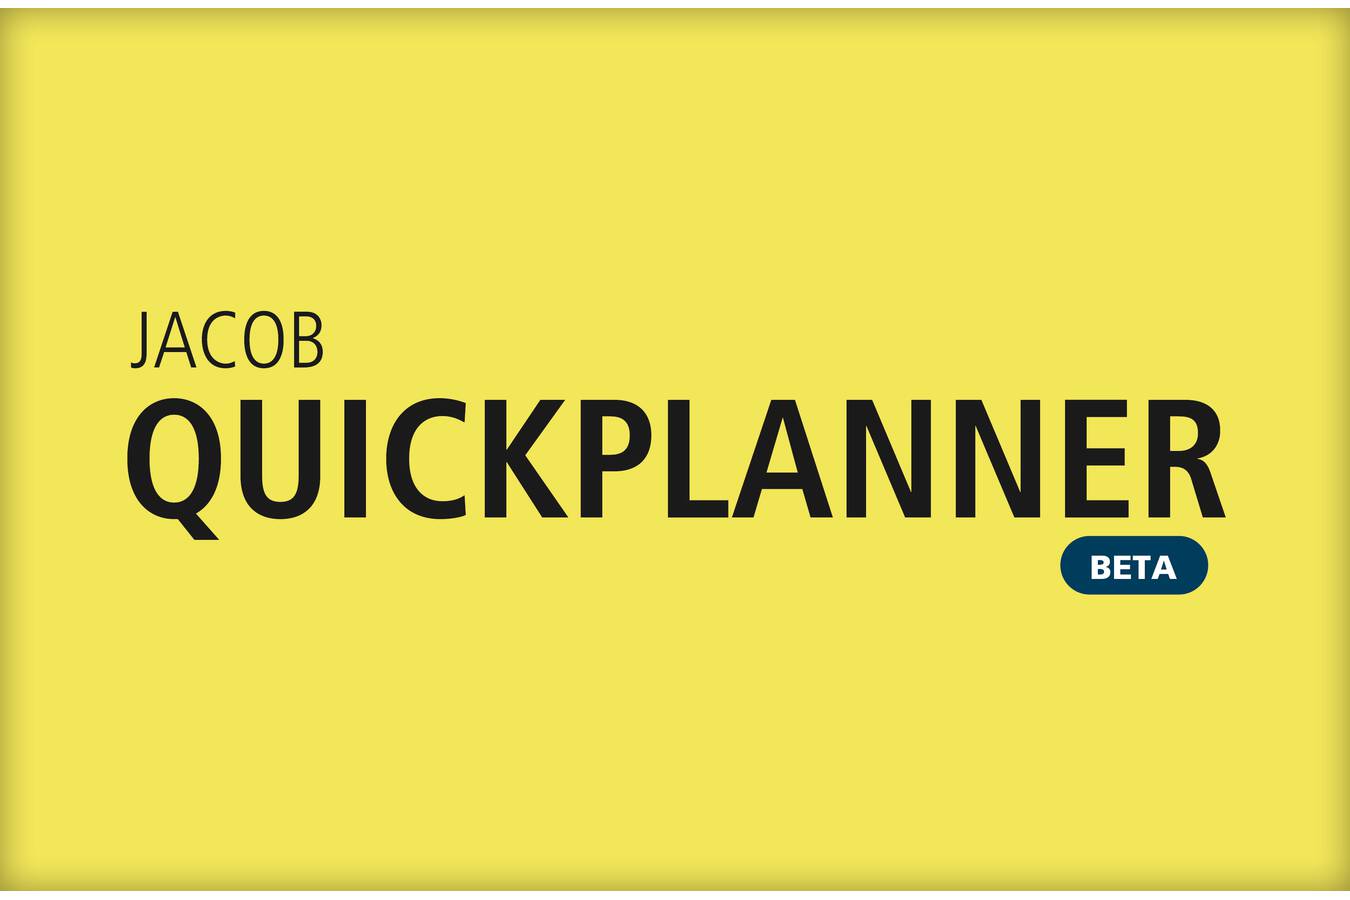 JACOB Quickplanner for fast project costing Do you need a quick cost estimate for your project planning? JACOB Quickplanner - Beta version offers project costing in just two steps